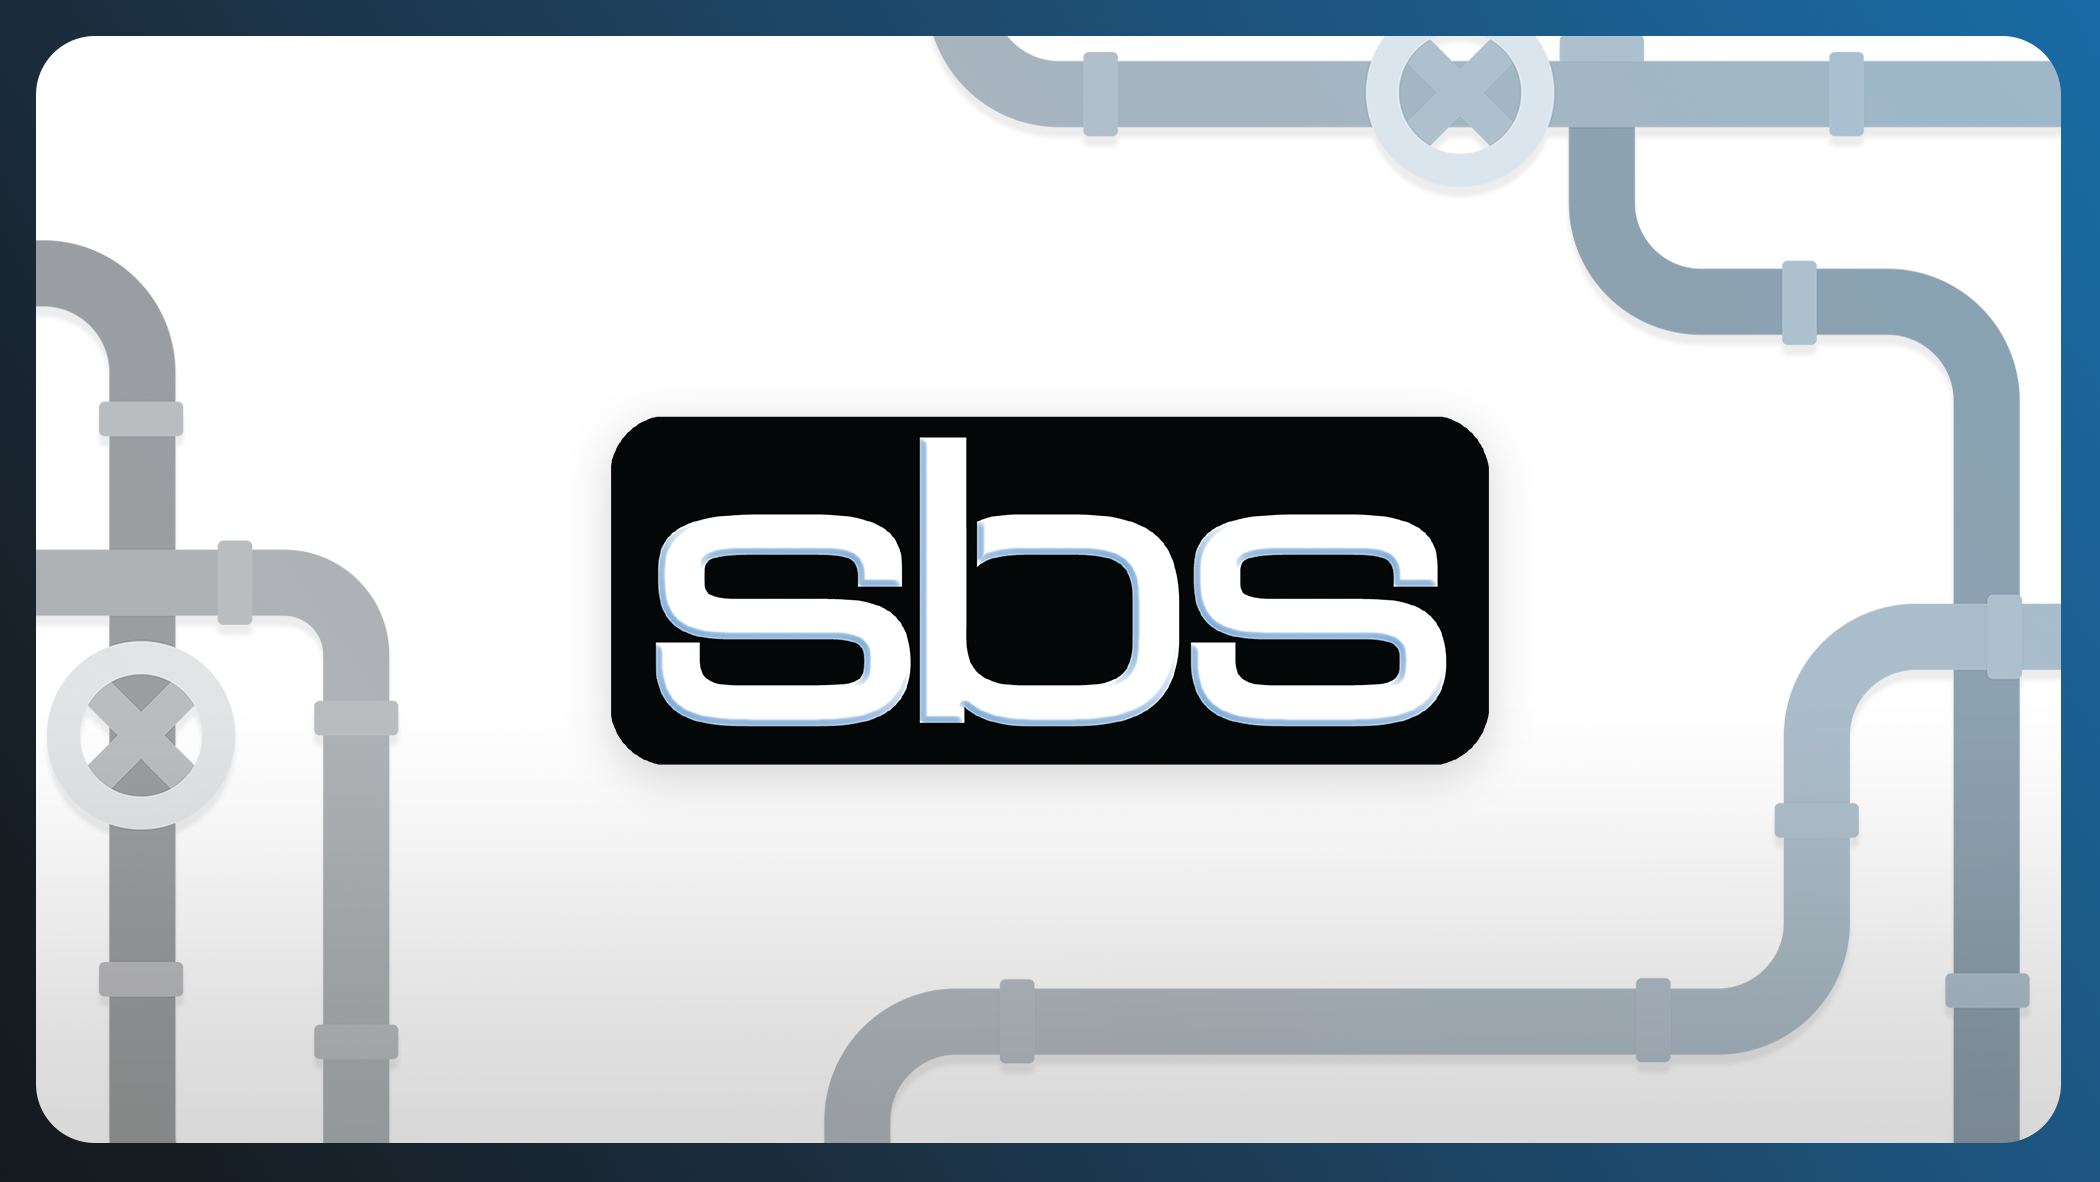 Image of SBS logo surrounded by utility pipes